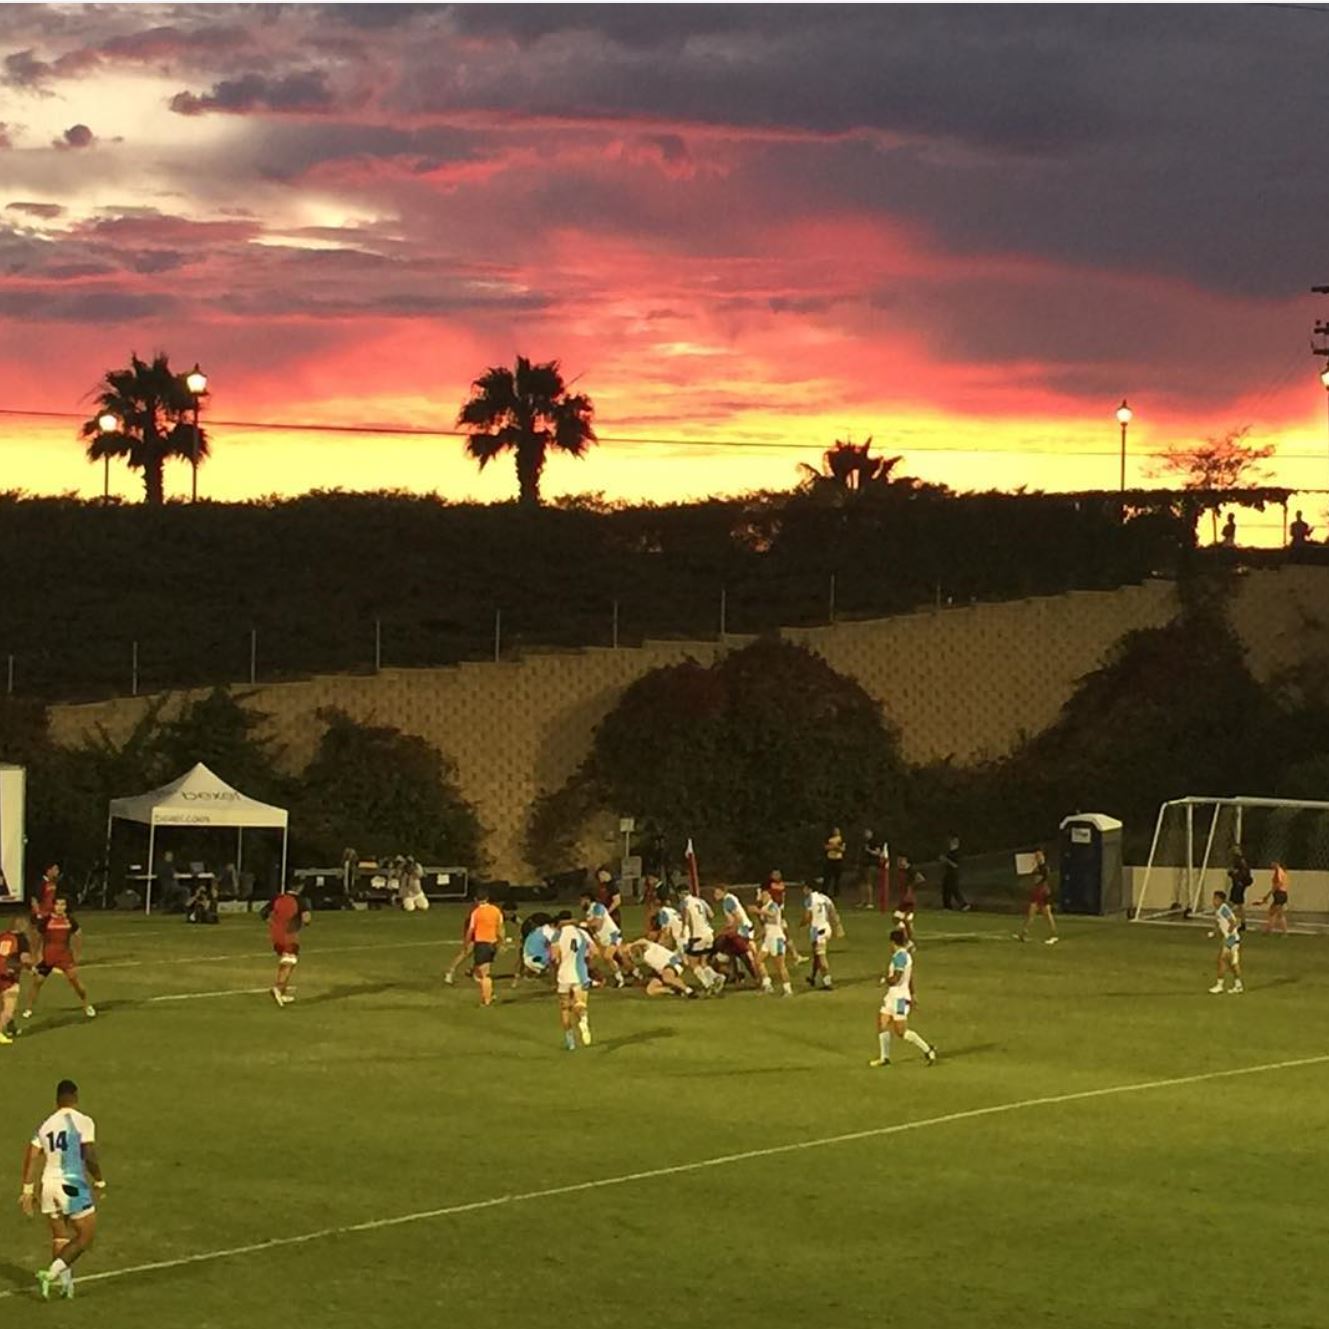 Not a bad backdrop for some Saturday night rugby in San Diego...